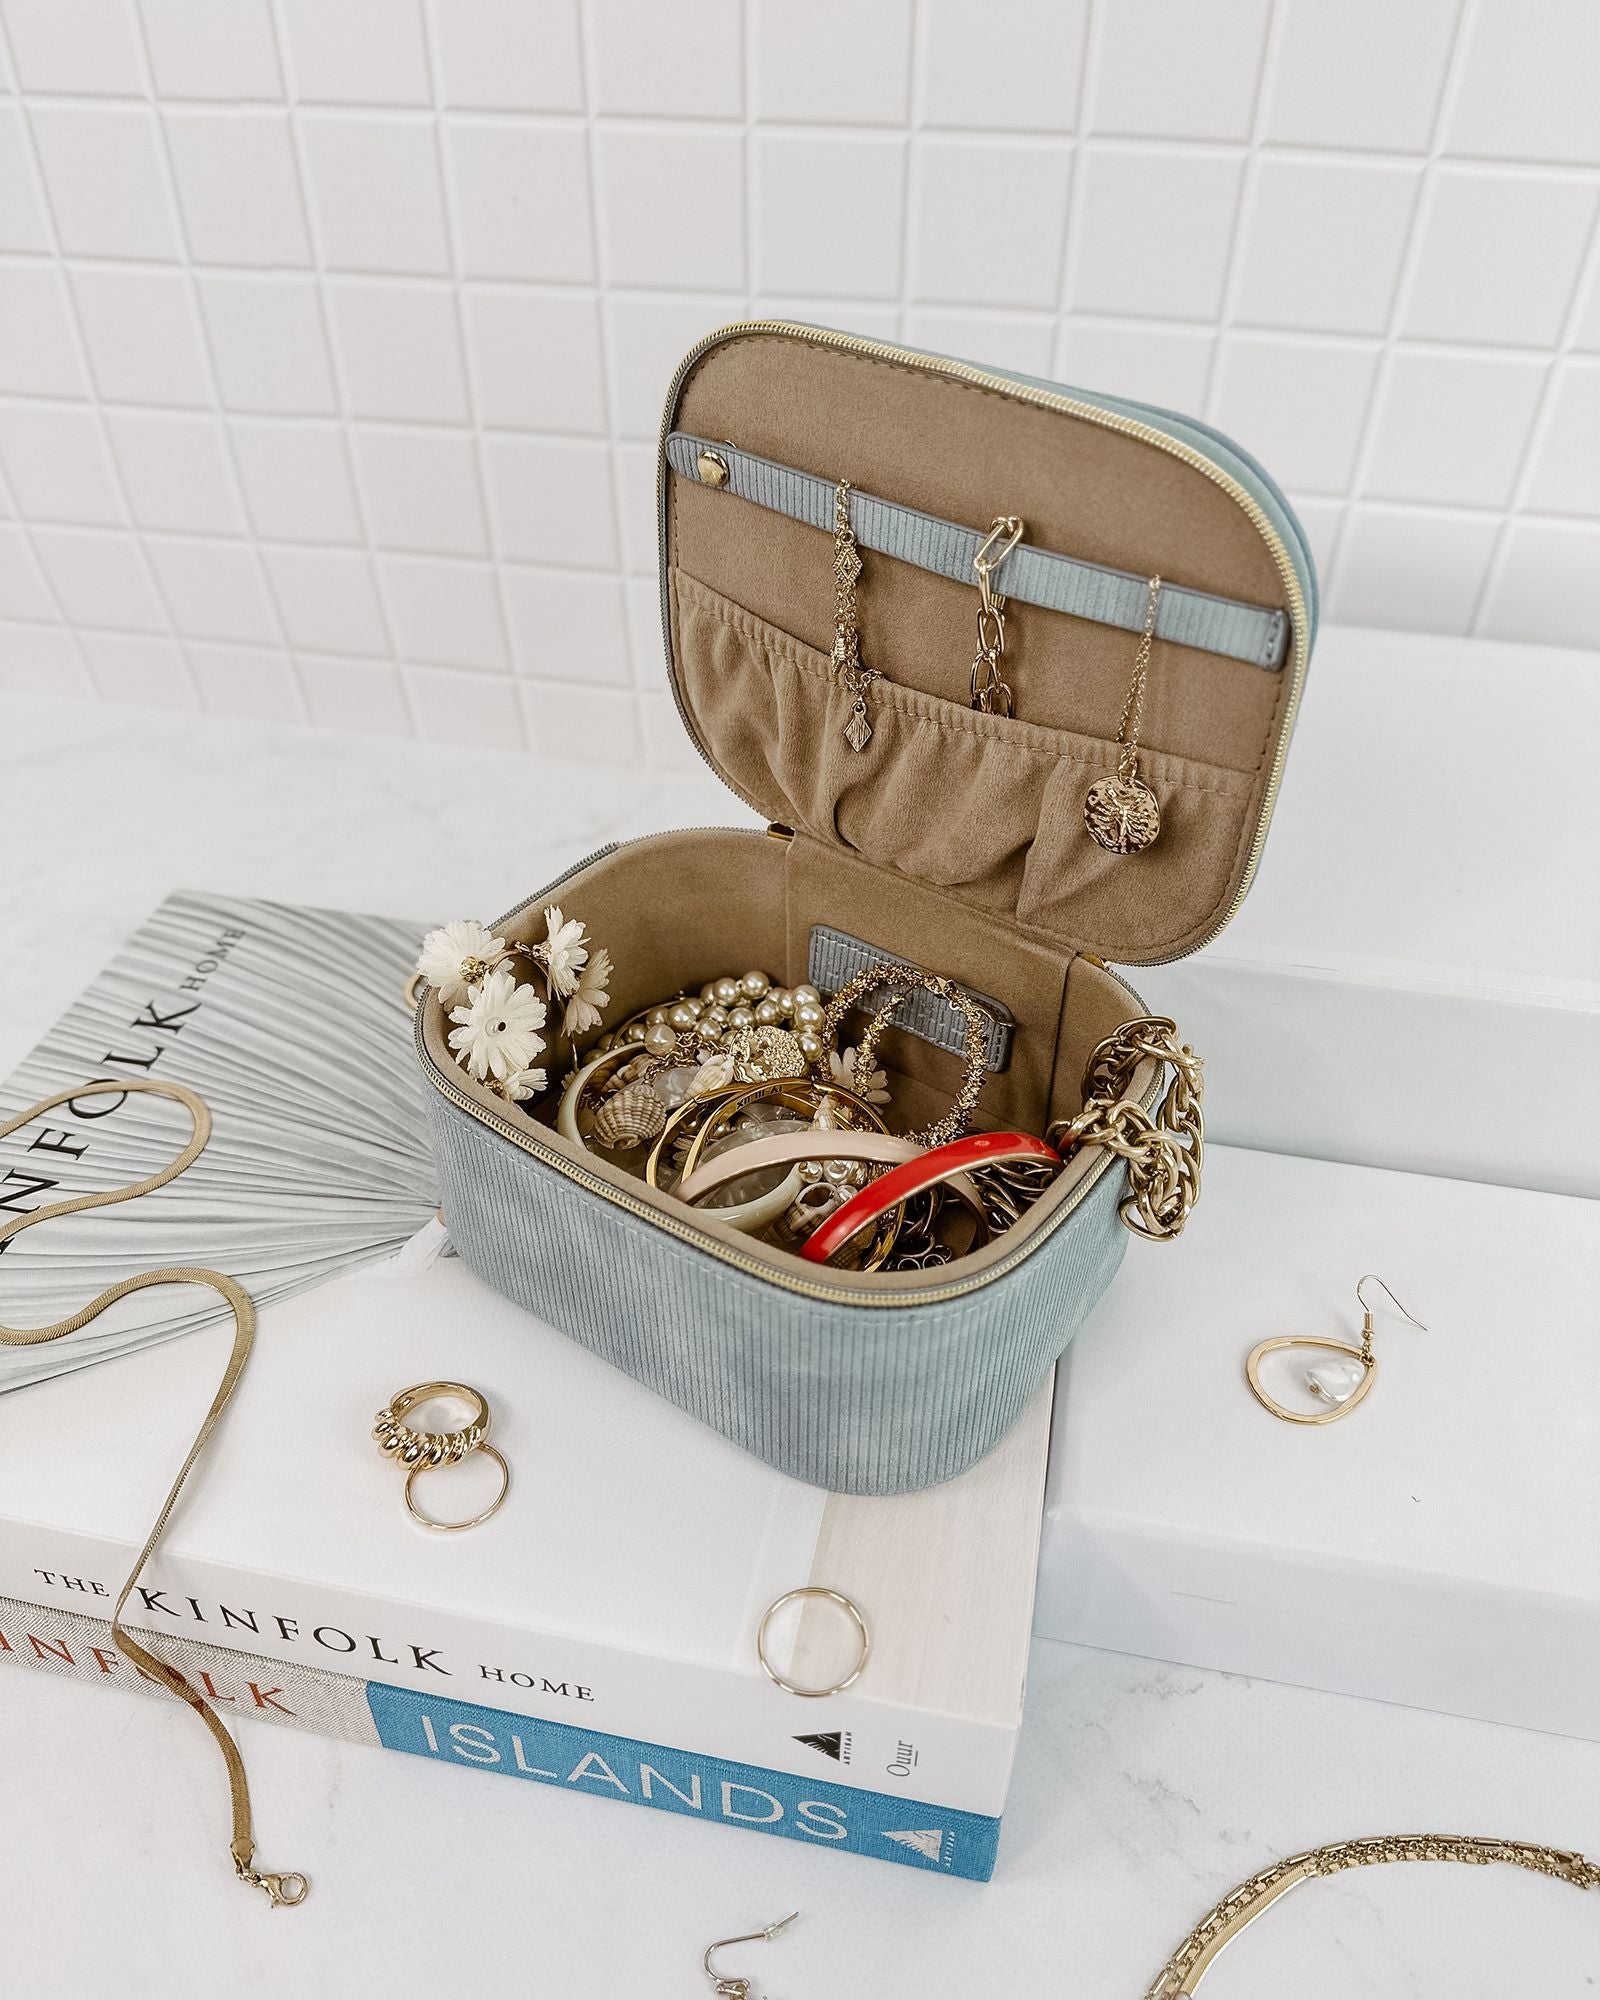 The Louenhide Jesse Jewelry Case is a medium size, rectangular jewelry case designed to go wherever you go. 